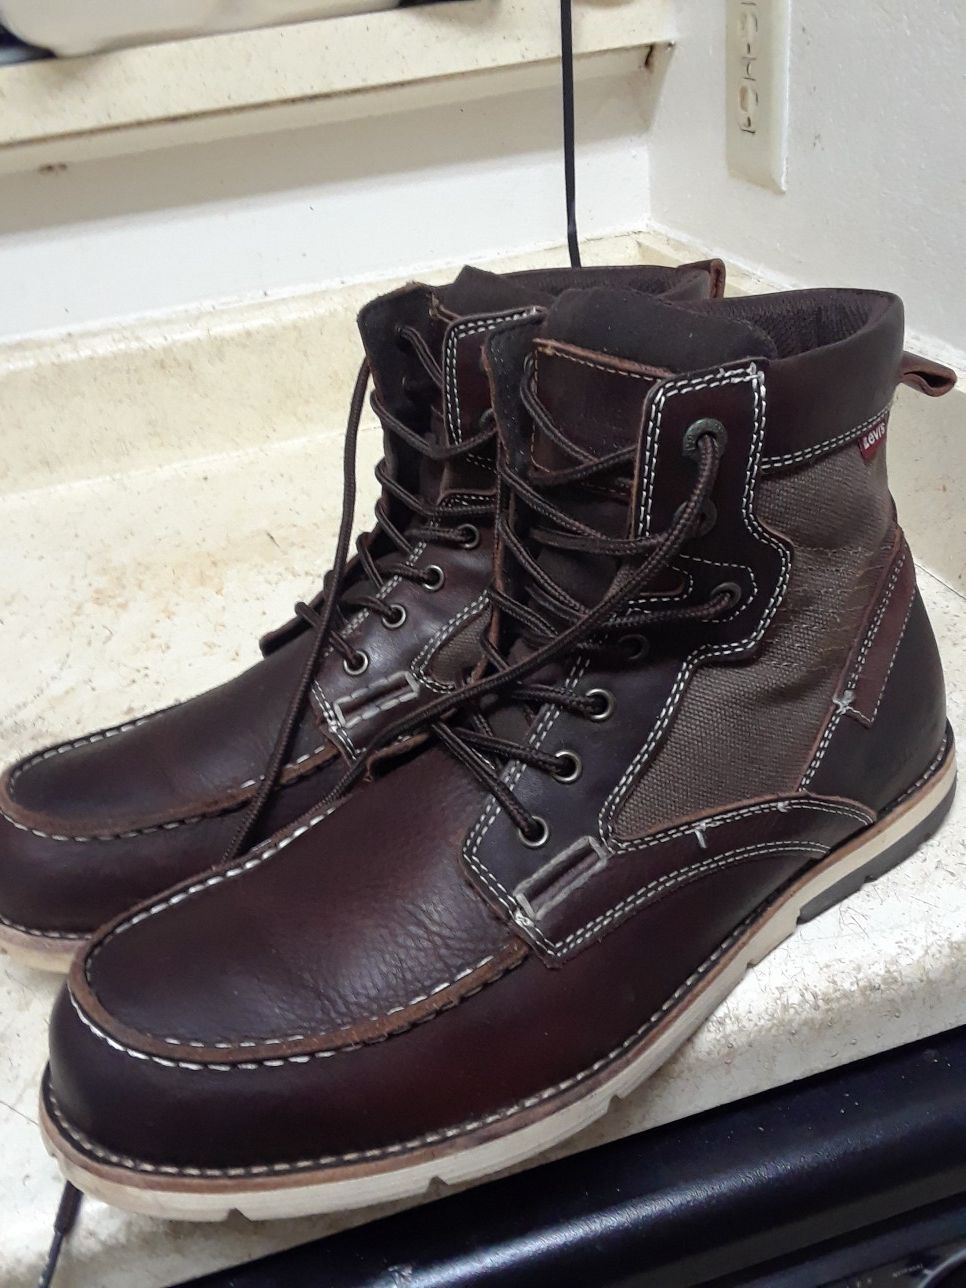 SIZE 13 LEVIE'S MEN'S BOOTS. BARELY USED. SUPER CLEAN